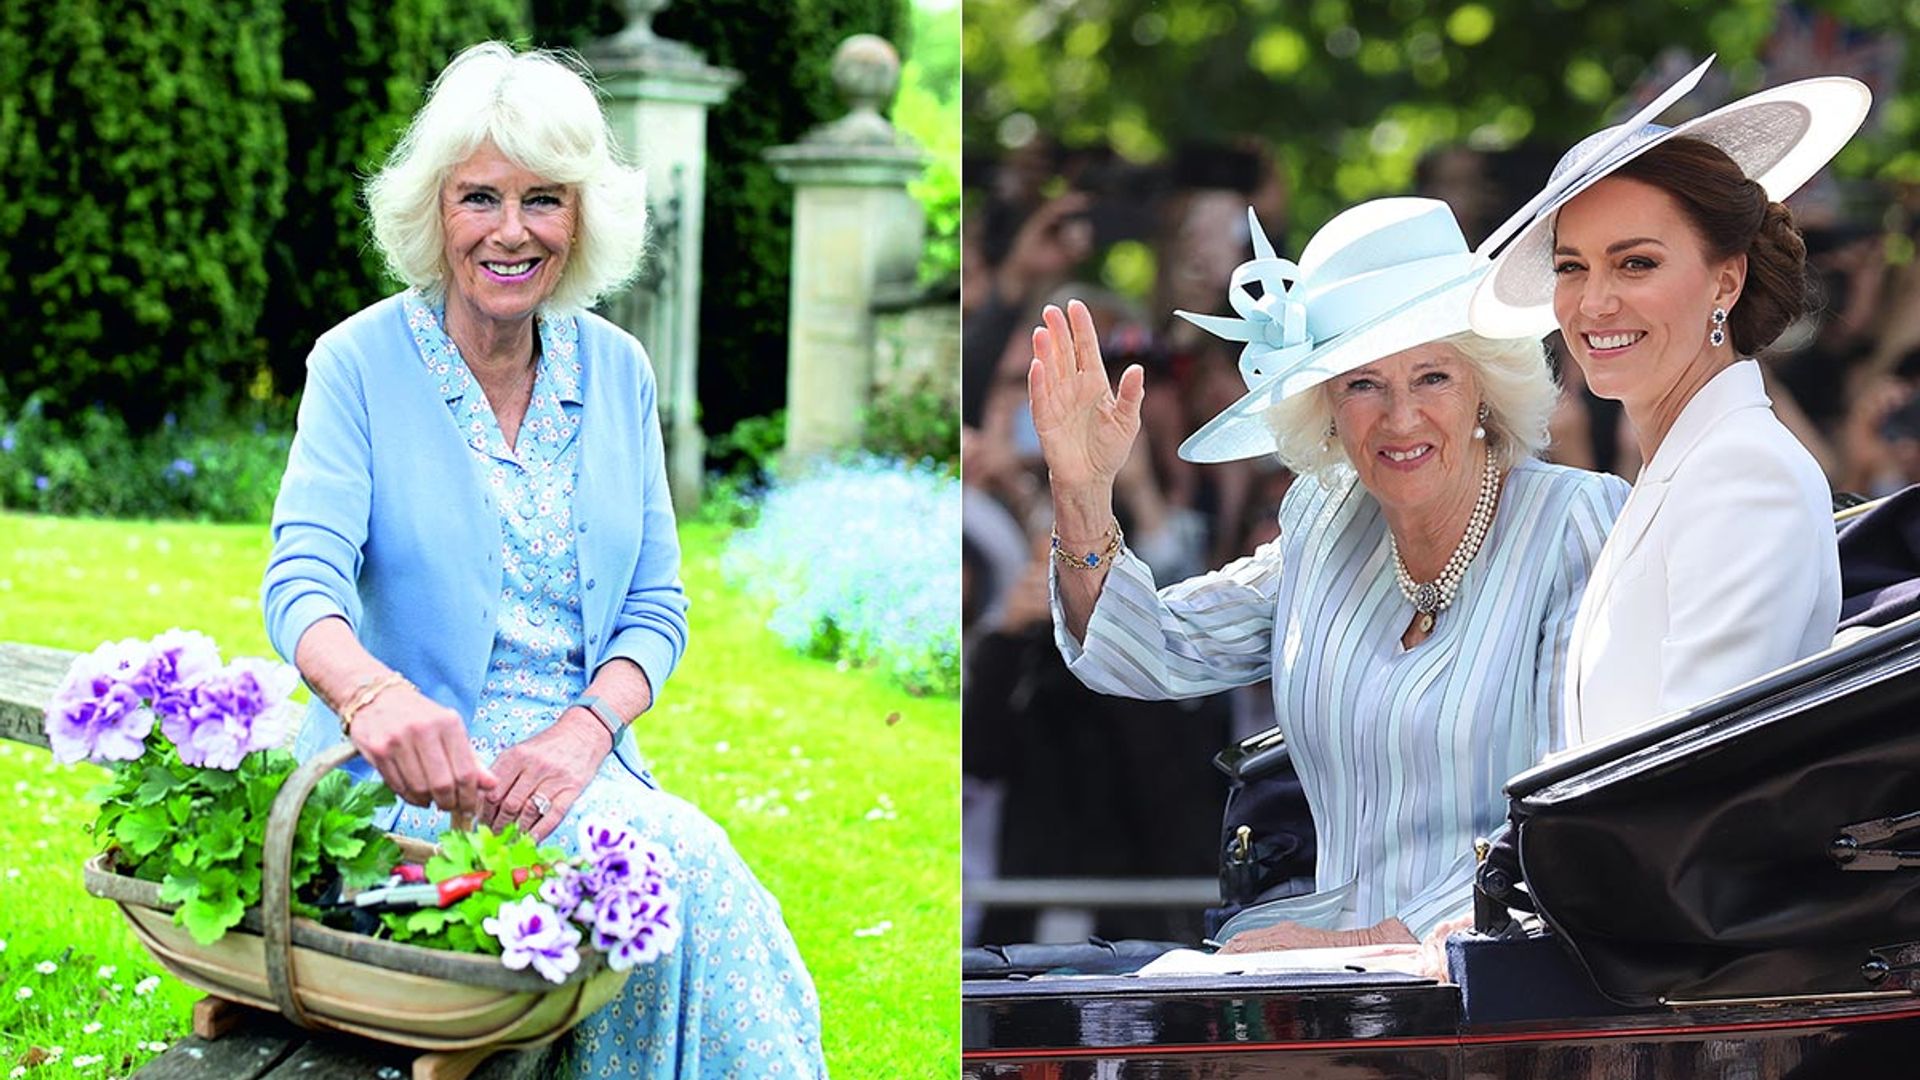 duchess of cornwall country life